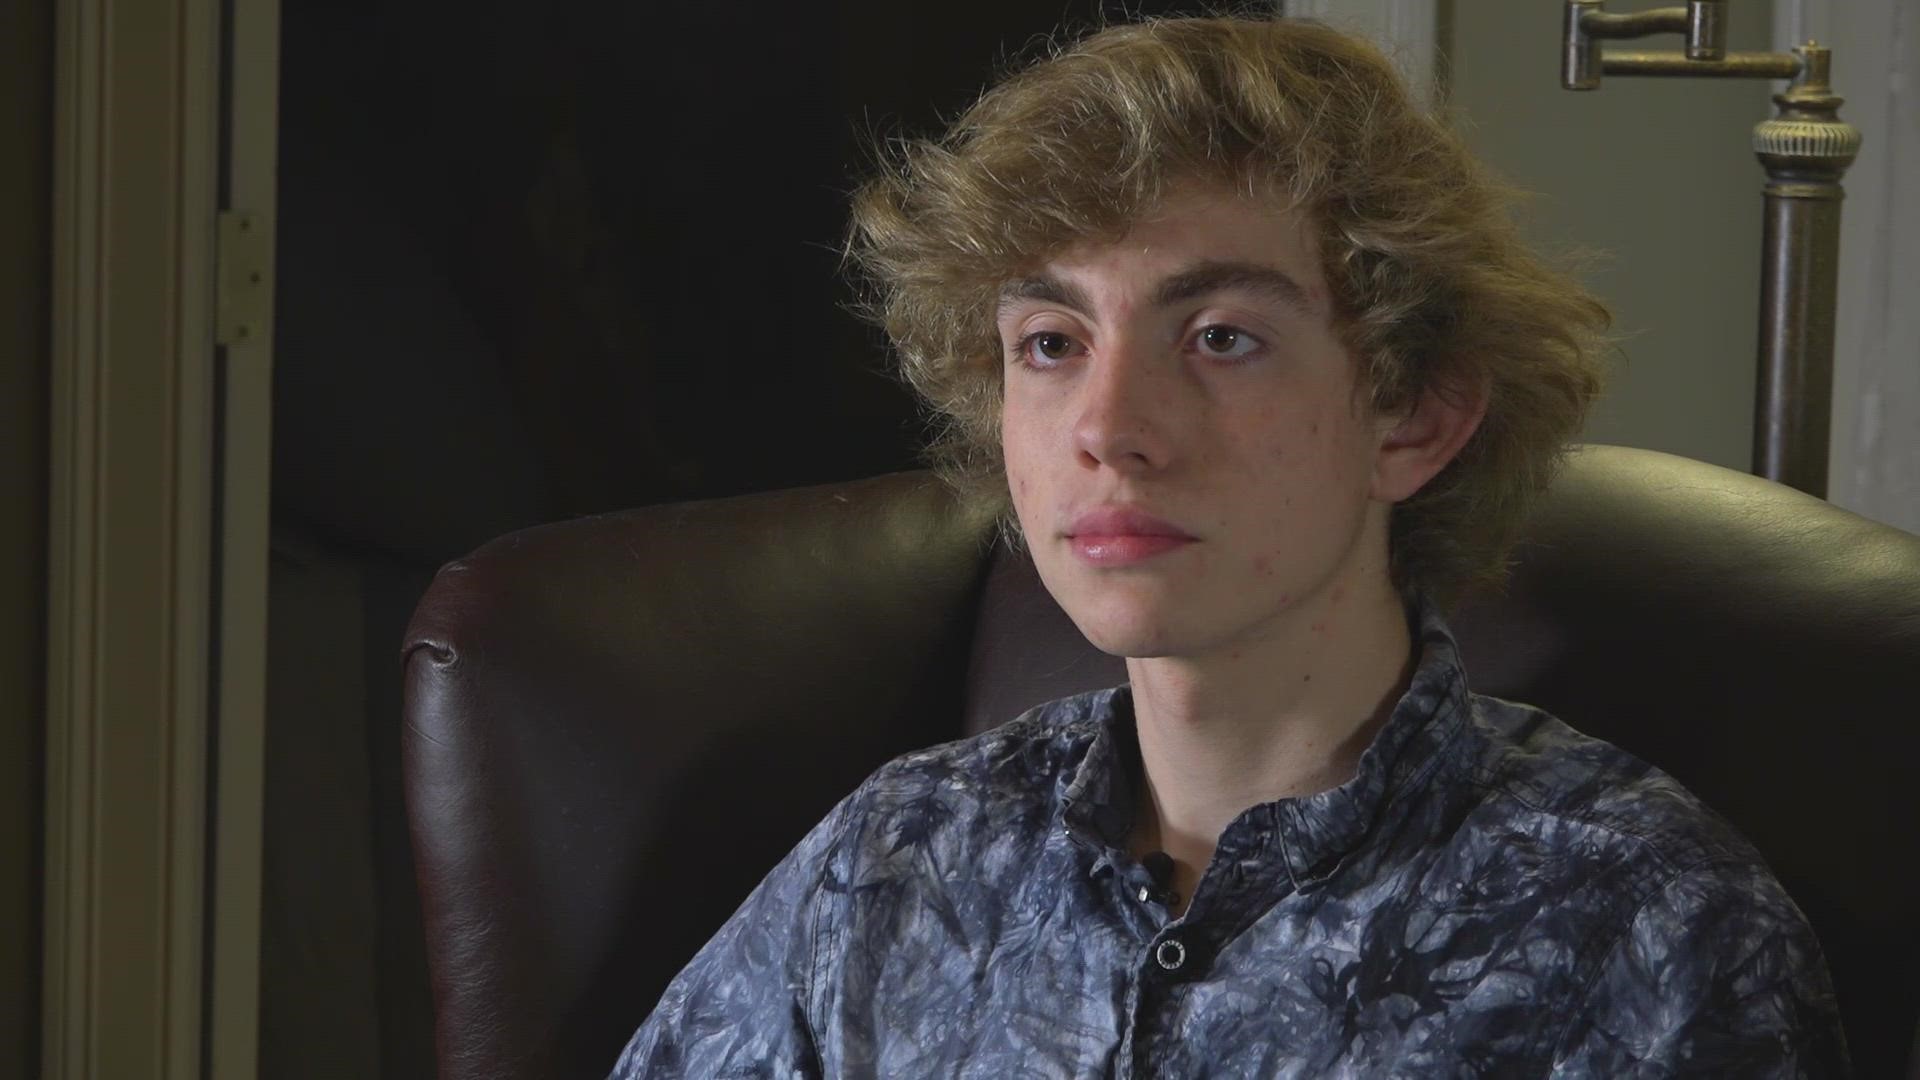 Marshwood sophomore Owen Clark, fed up with years of bullying, wrote an open letter to his classmates about his struggles with cutting and suicidal thoughts.